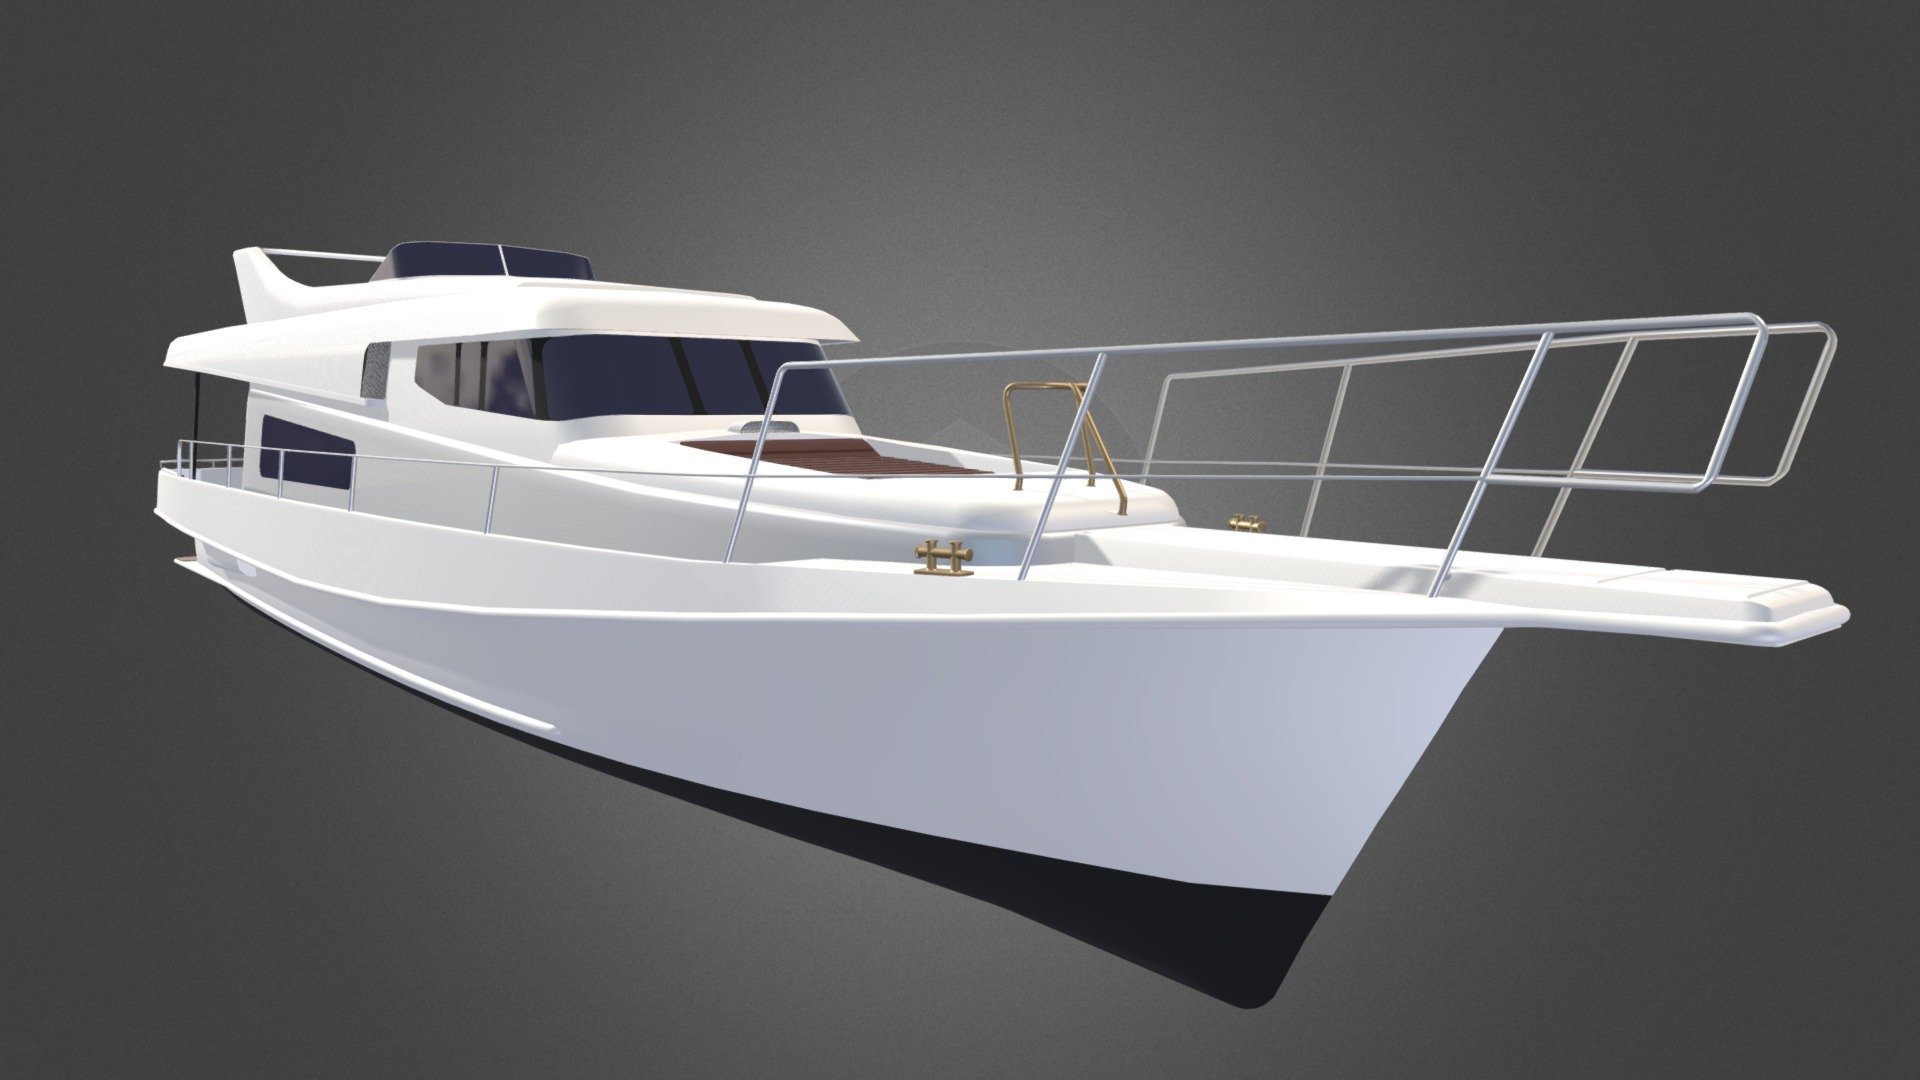 The first stage of the my coursework.
18-meter boat &ldquo;Admiralteec